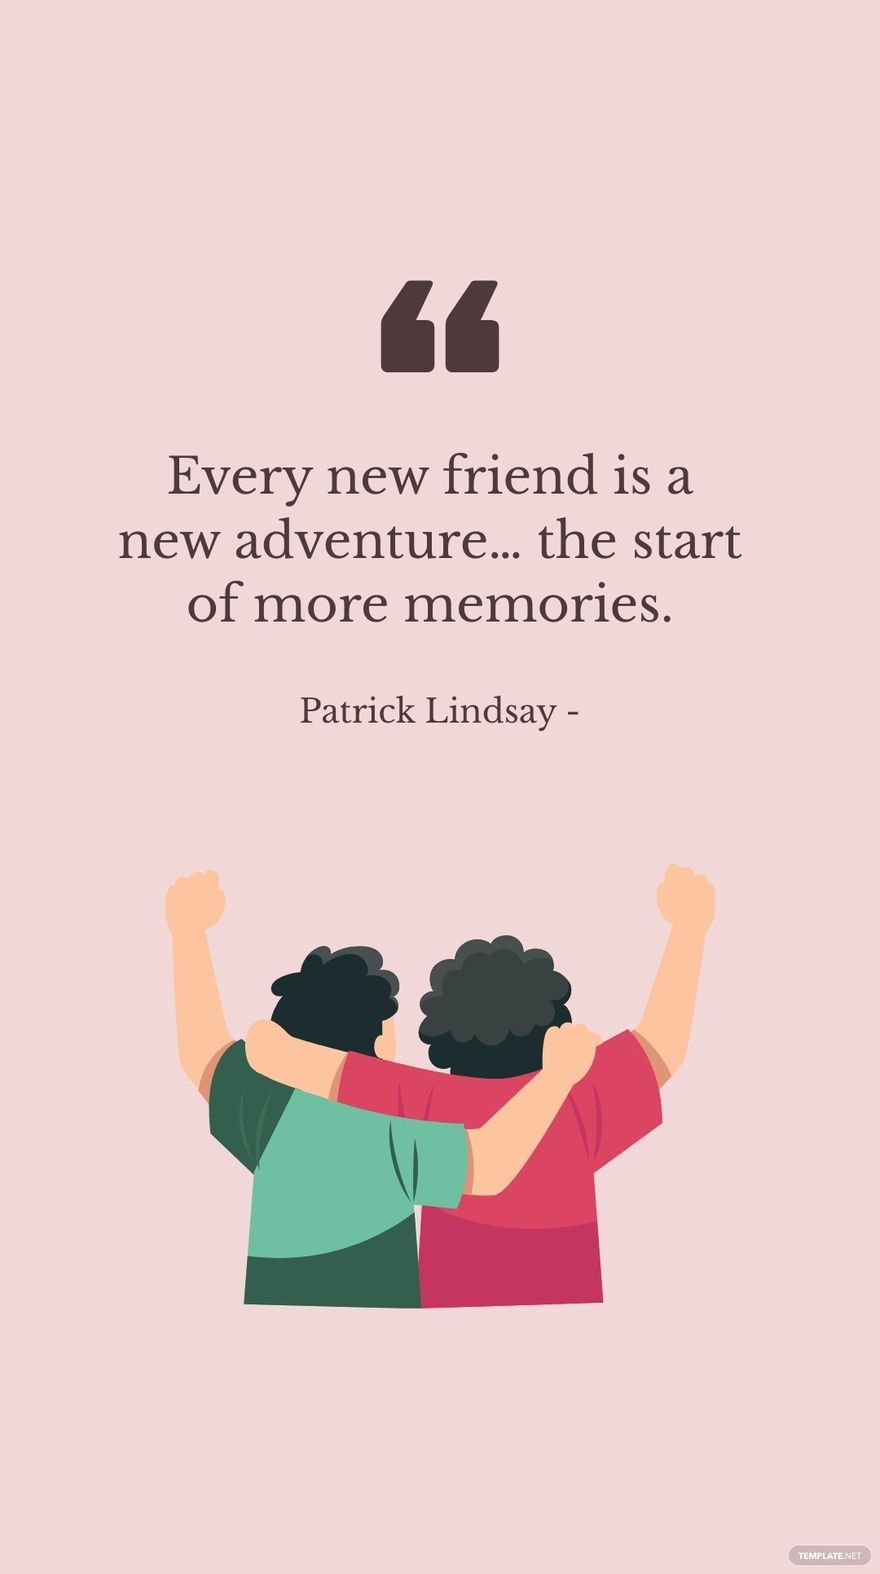 Patrick Lindsay - Every new friend is a new adventure… the start of more memories. in JPG